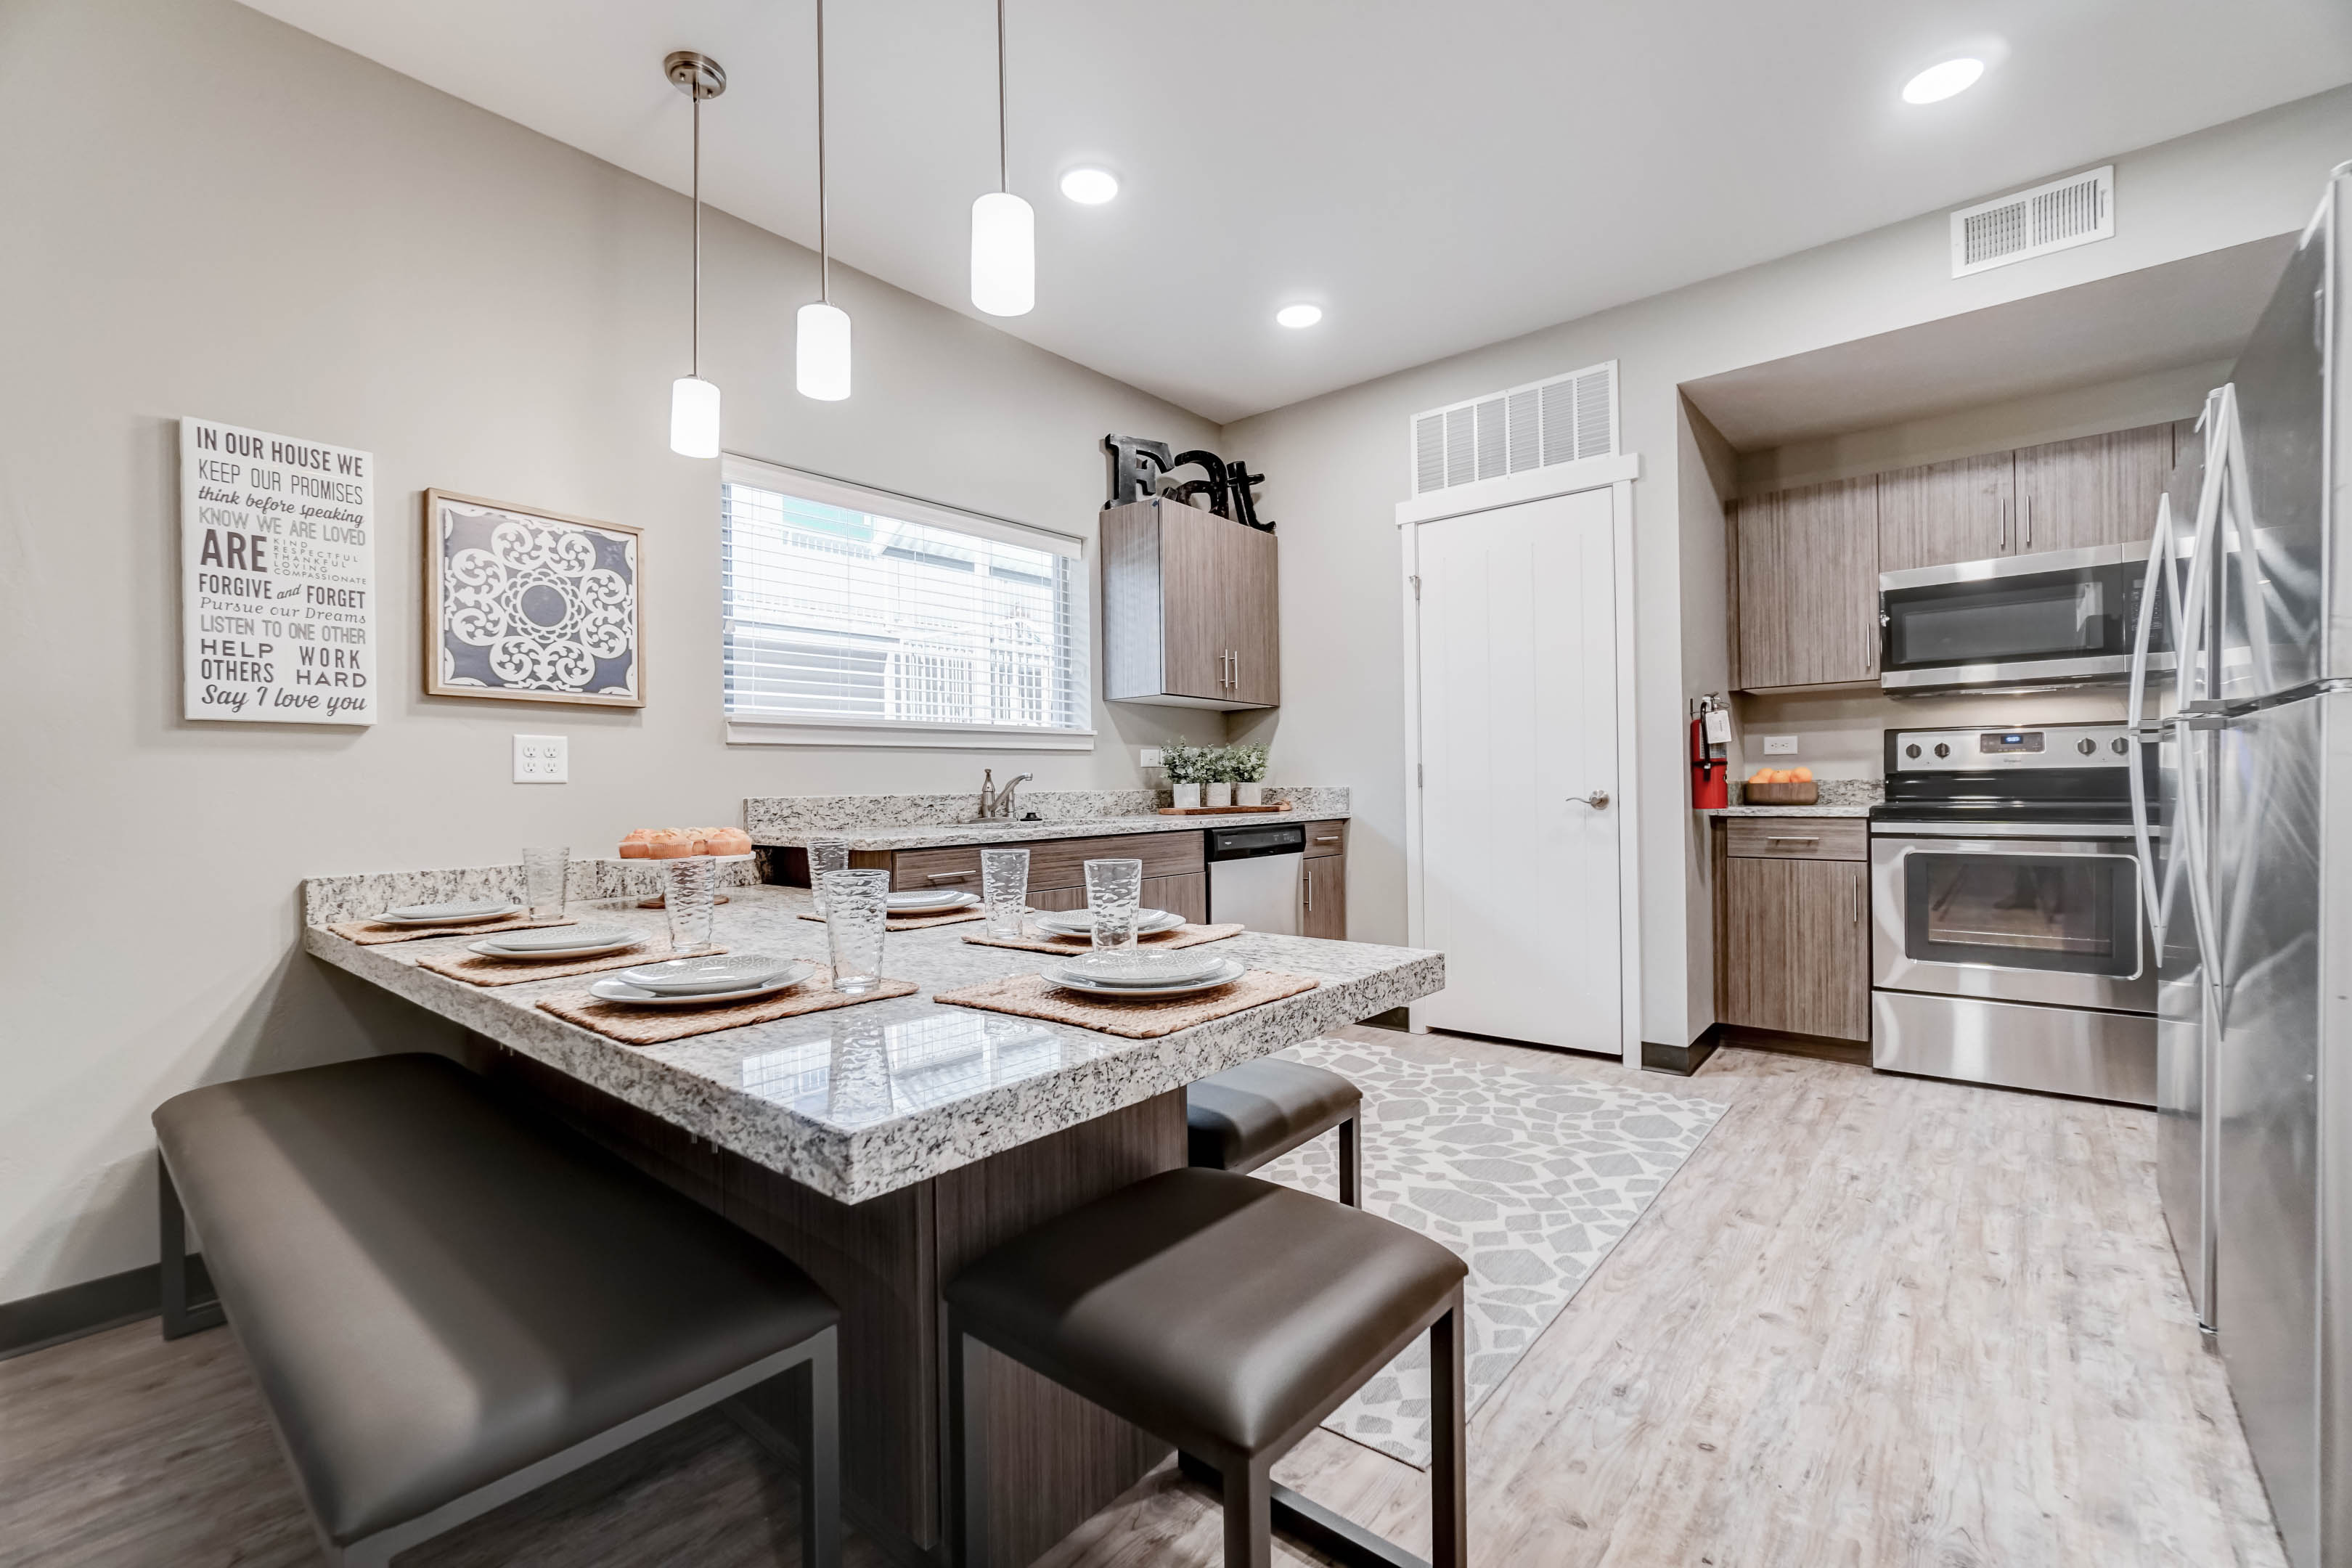 With two full-size refrigerators, granite countertops, lots of beautiful cabinets, stainless steel appliances, and a garbage disposal, the kitchen has everything you need!